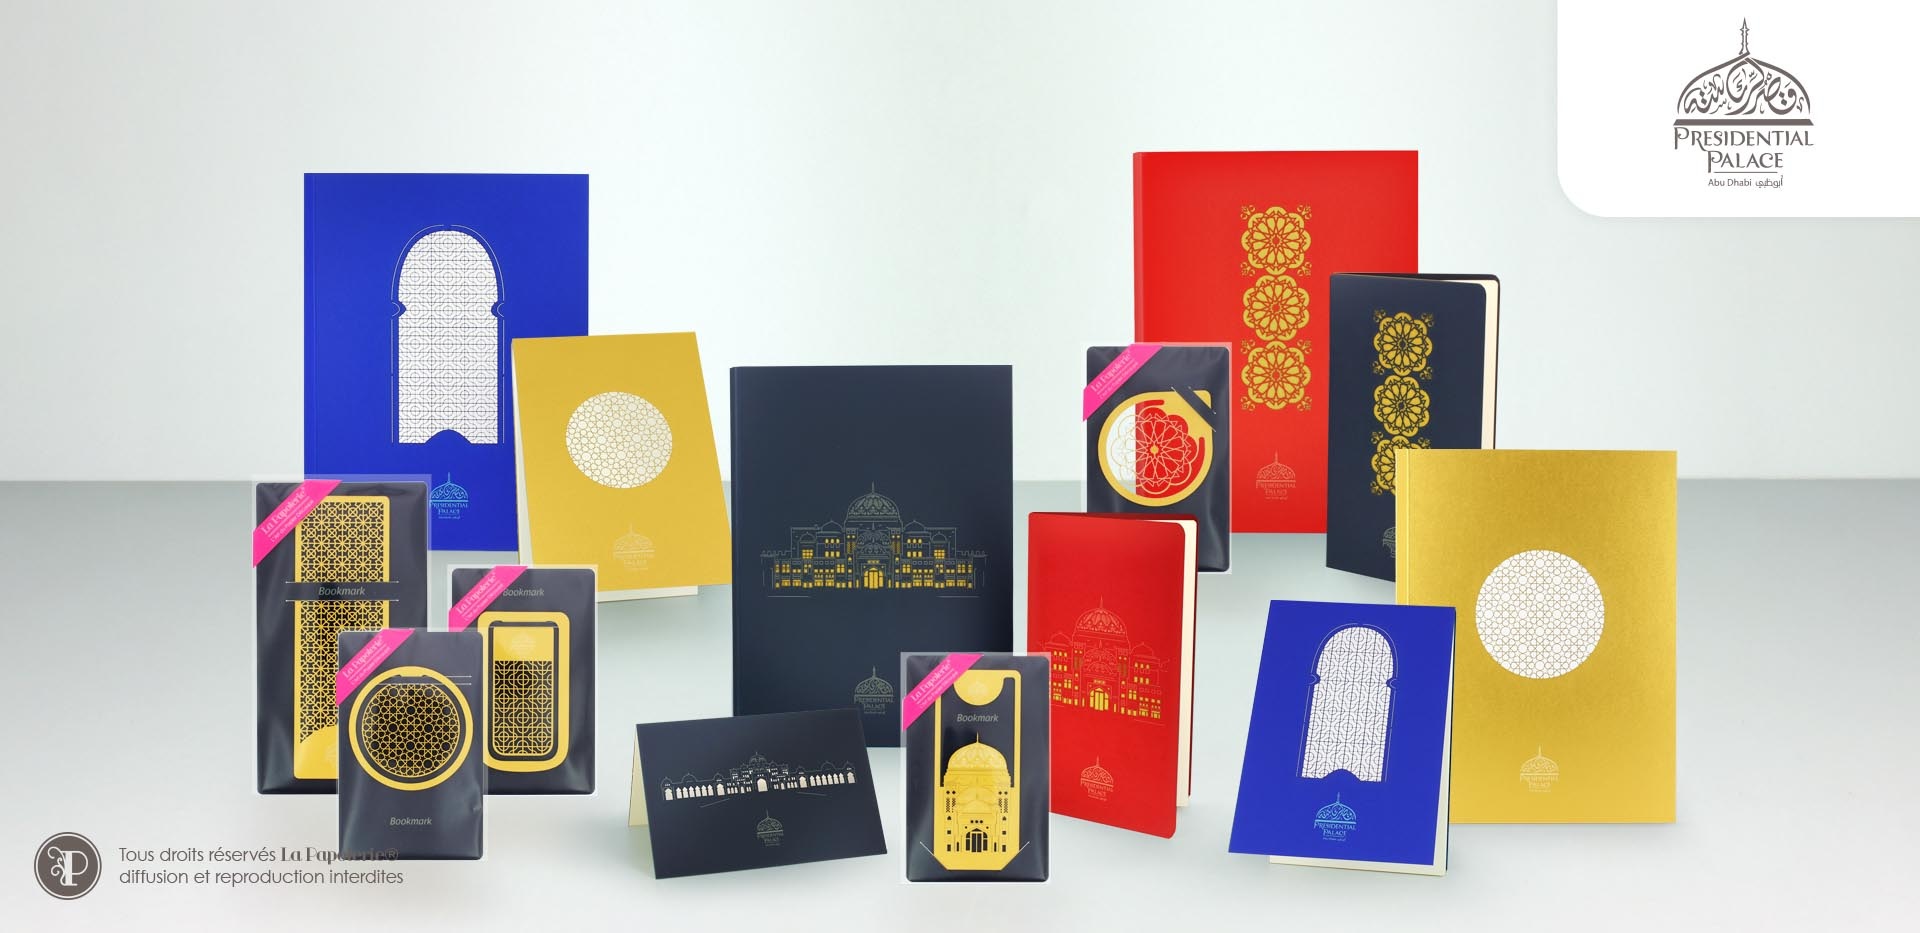 Stationery assortment in laser-cut for the Presidential Palace of Abu Dhabi